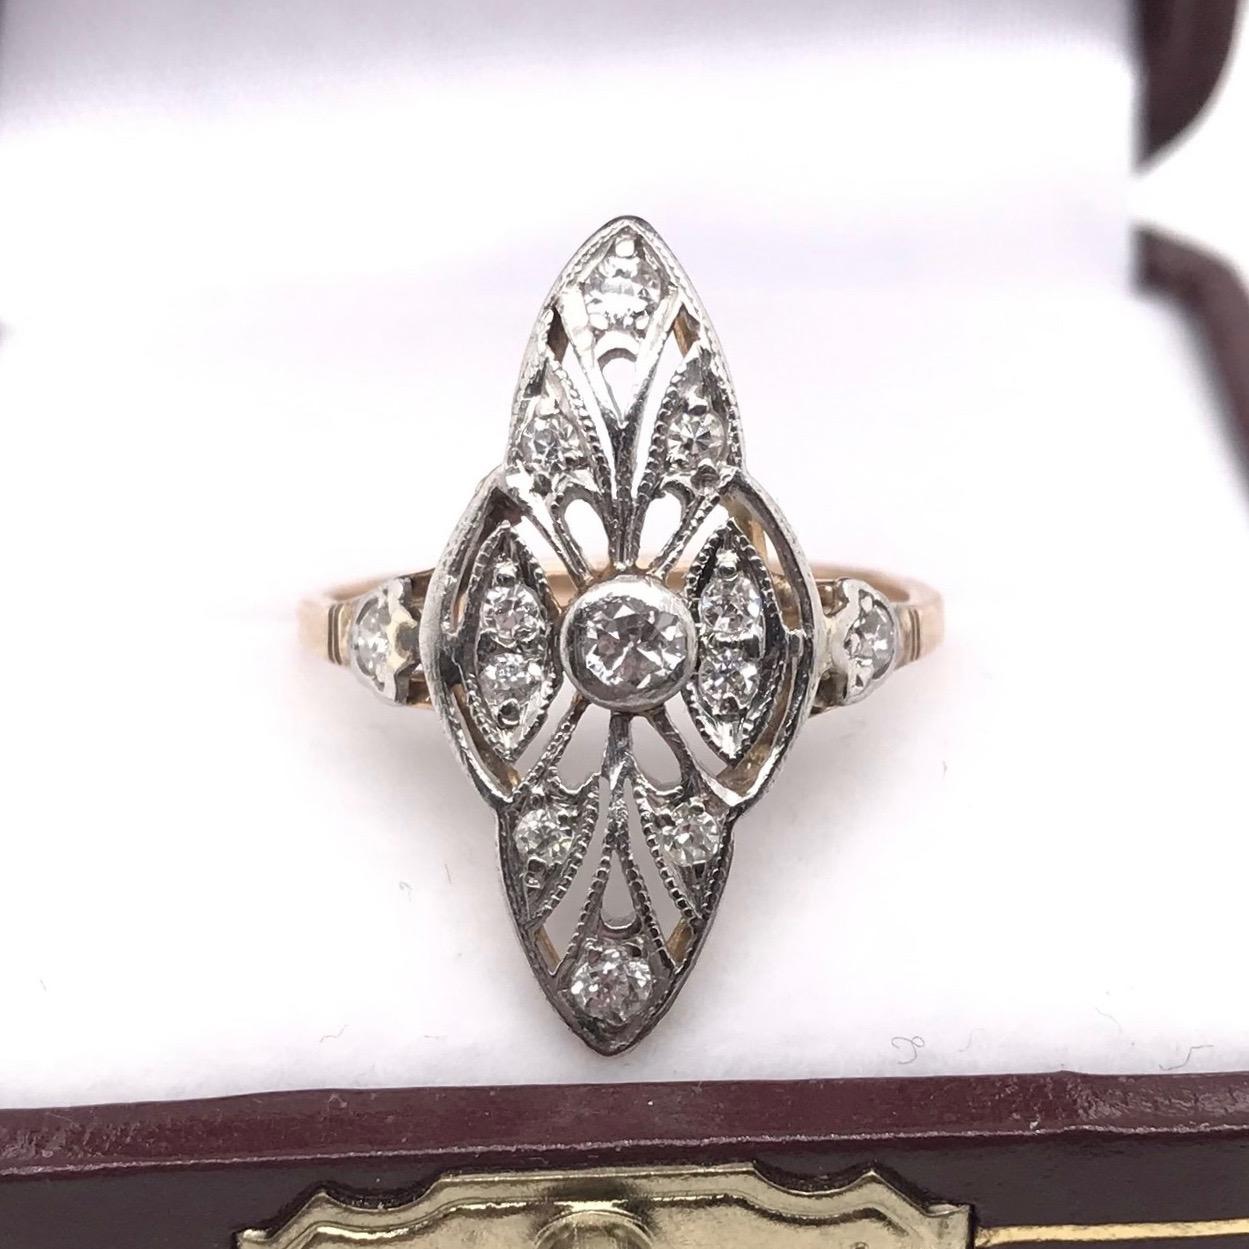 This antique piece was handcrafted sometime during the Edwardian design period ( 1900-1920 ). The setting is 10k gold and features 13 sparkling diamond accents. The setting features subtle milgrain accents as well as white gold accents. This is a